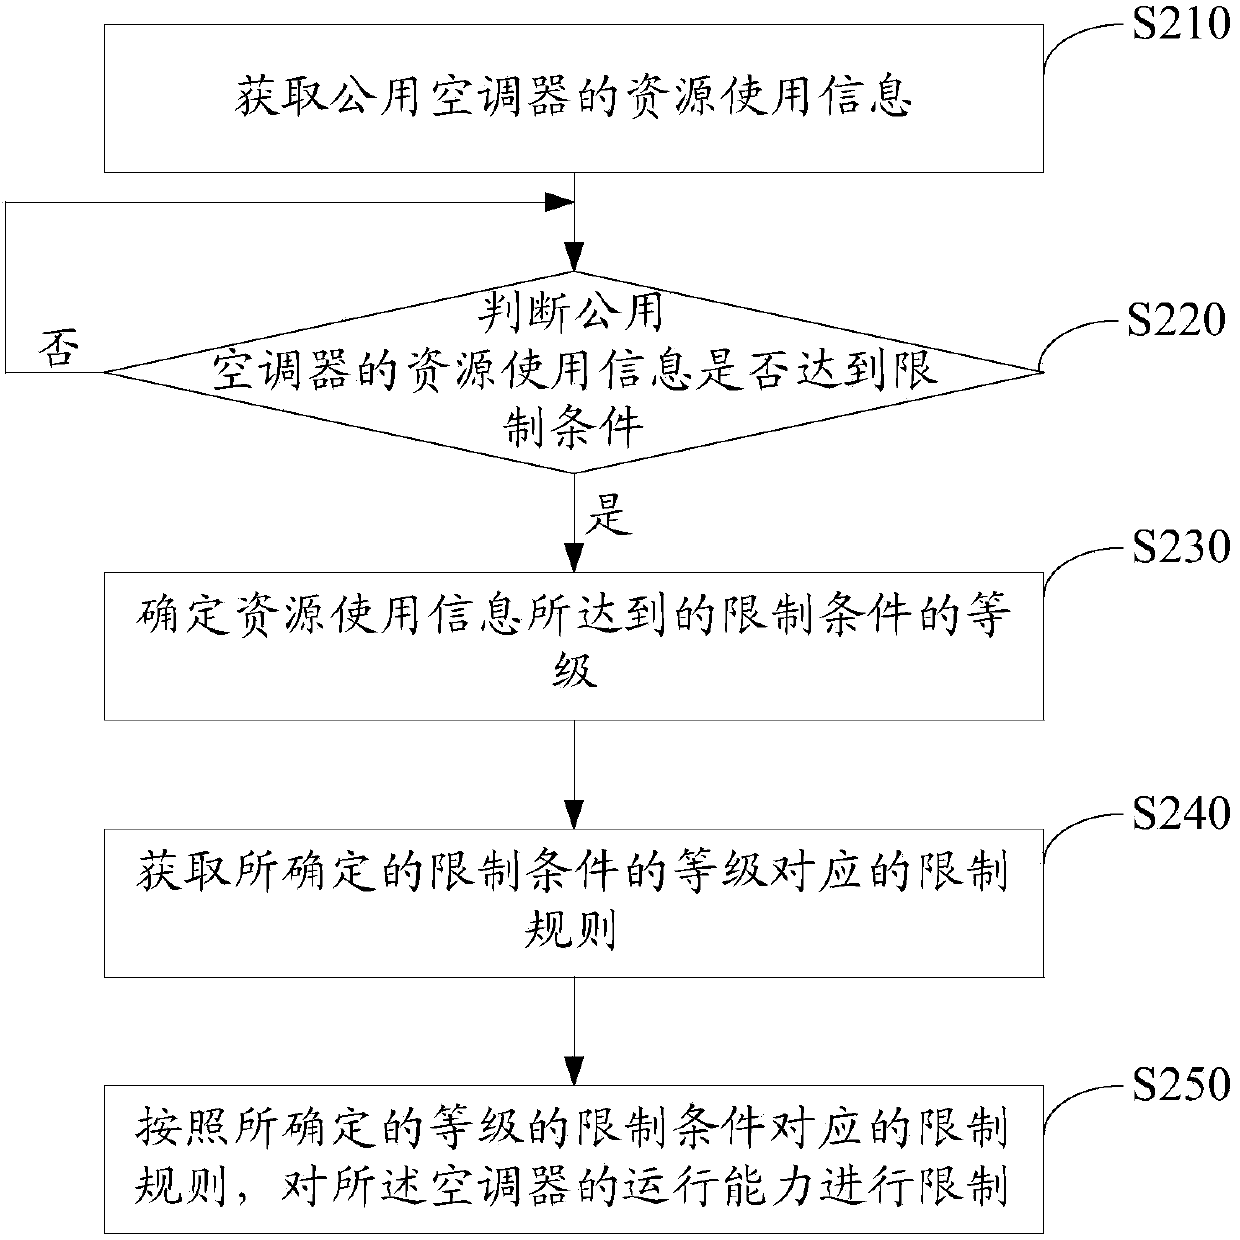 Public air conditioner, method for controlling public air conditioner and public air conditioner system